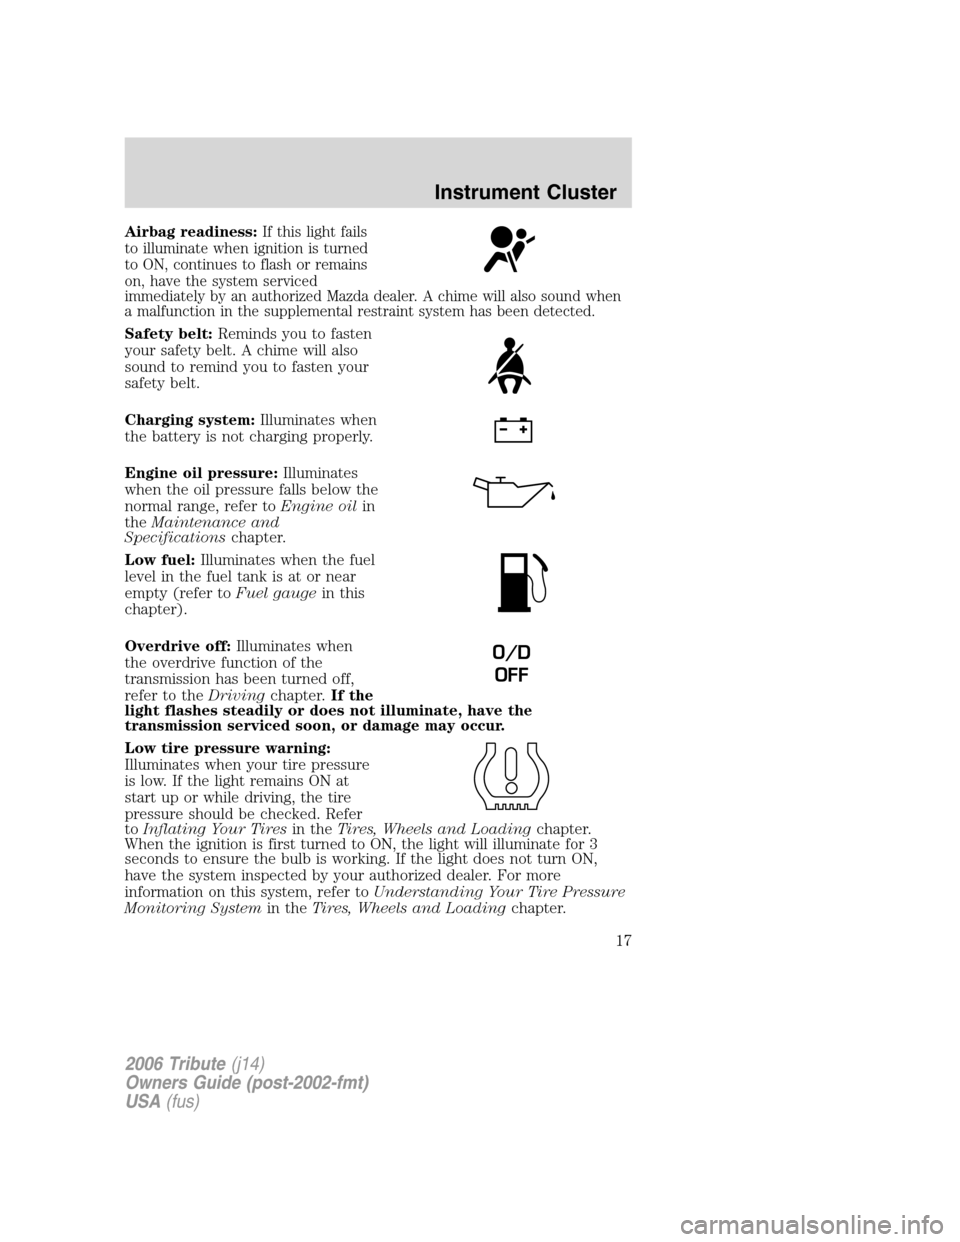 MAZDA MODEL TRIBUTE 2006  Owners Manual (in English) Airbag readiness:If this light fails
to illuminate when ignition is turned
to ON, continues to flash or remains
on, have the system serviced
immediately by an authorized Mazda dealer. A chime will als